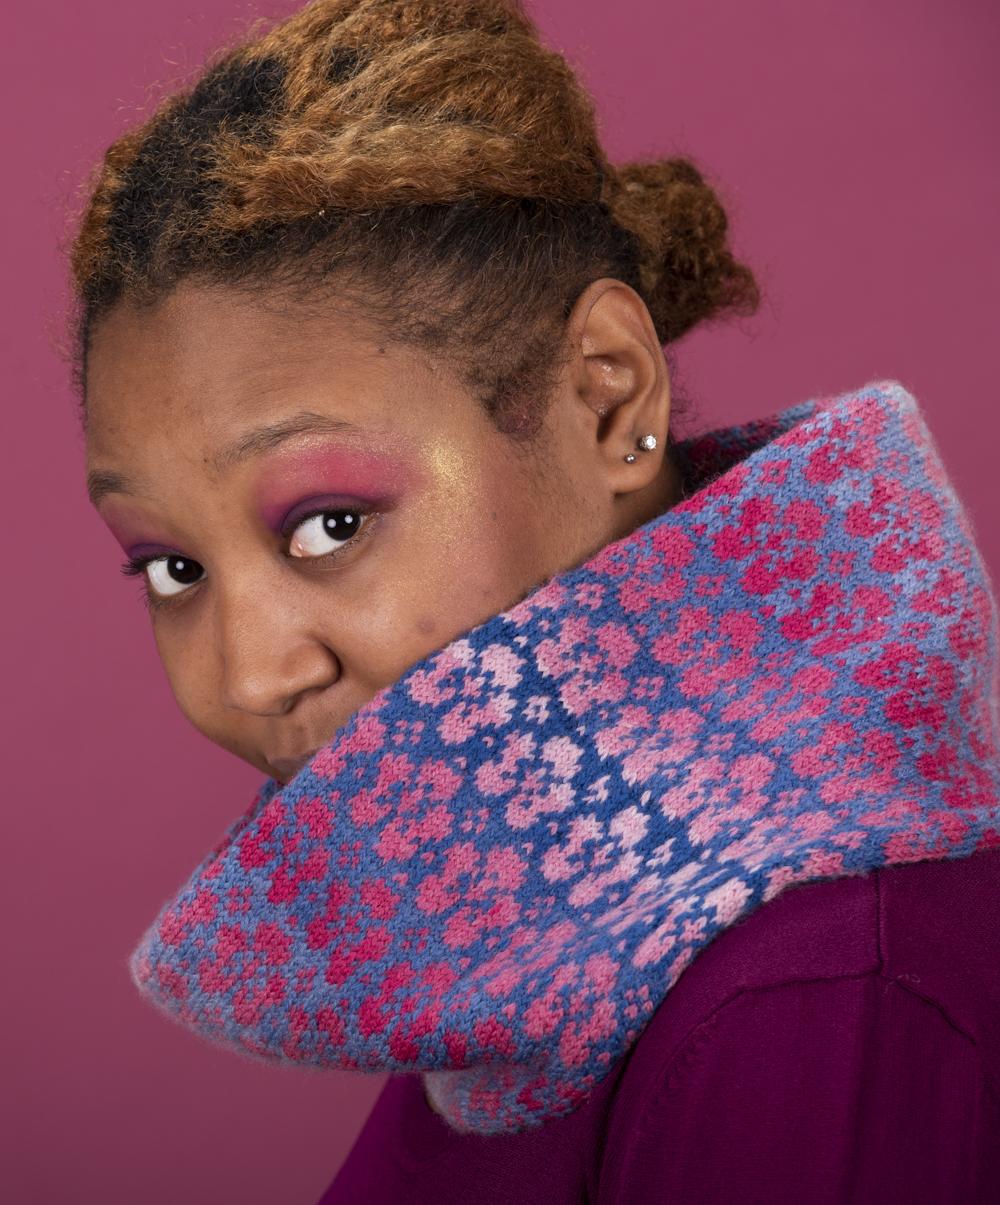 Taia peeps out of the Flombre cowl; it is worked with a blue gradient in background and pink gradient flowers as the pattern and Taia wears an ombre top in deep to mid pink; the background of the photo is also pink